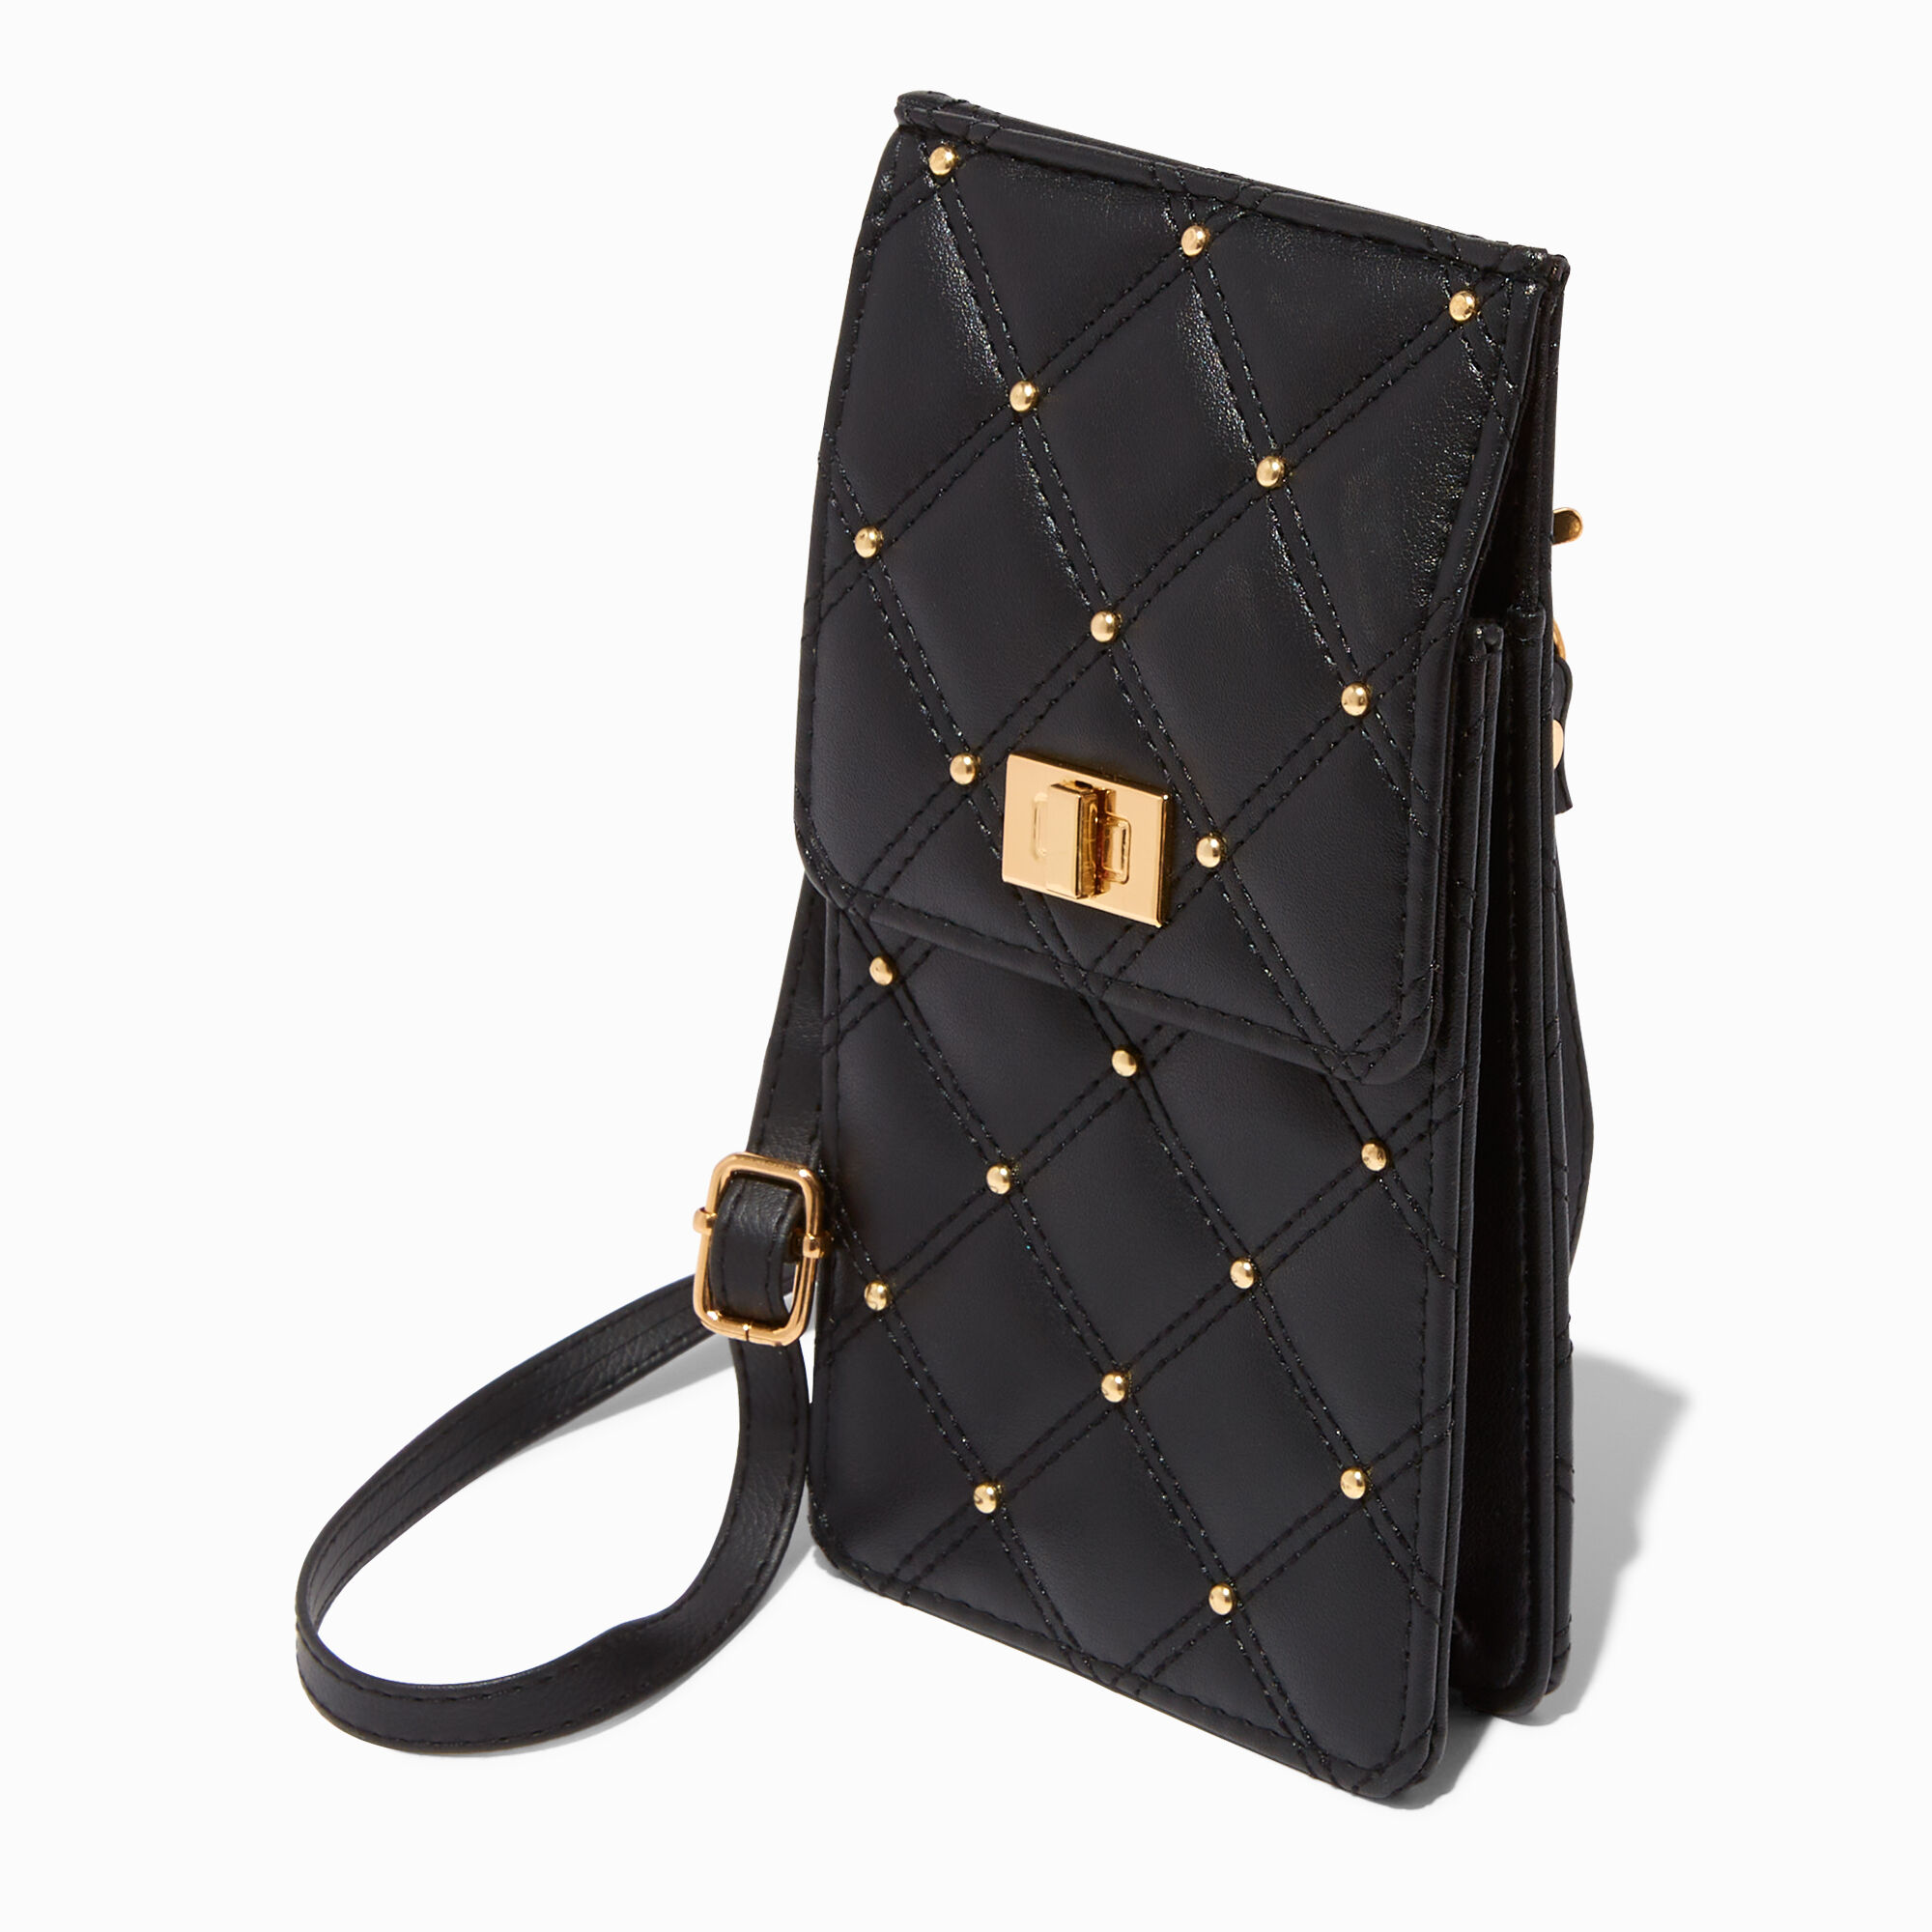 View Claires Quilted Gold Studded Phone Crossbody Bag Black information